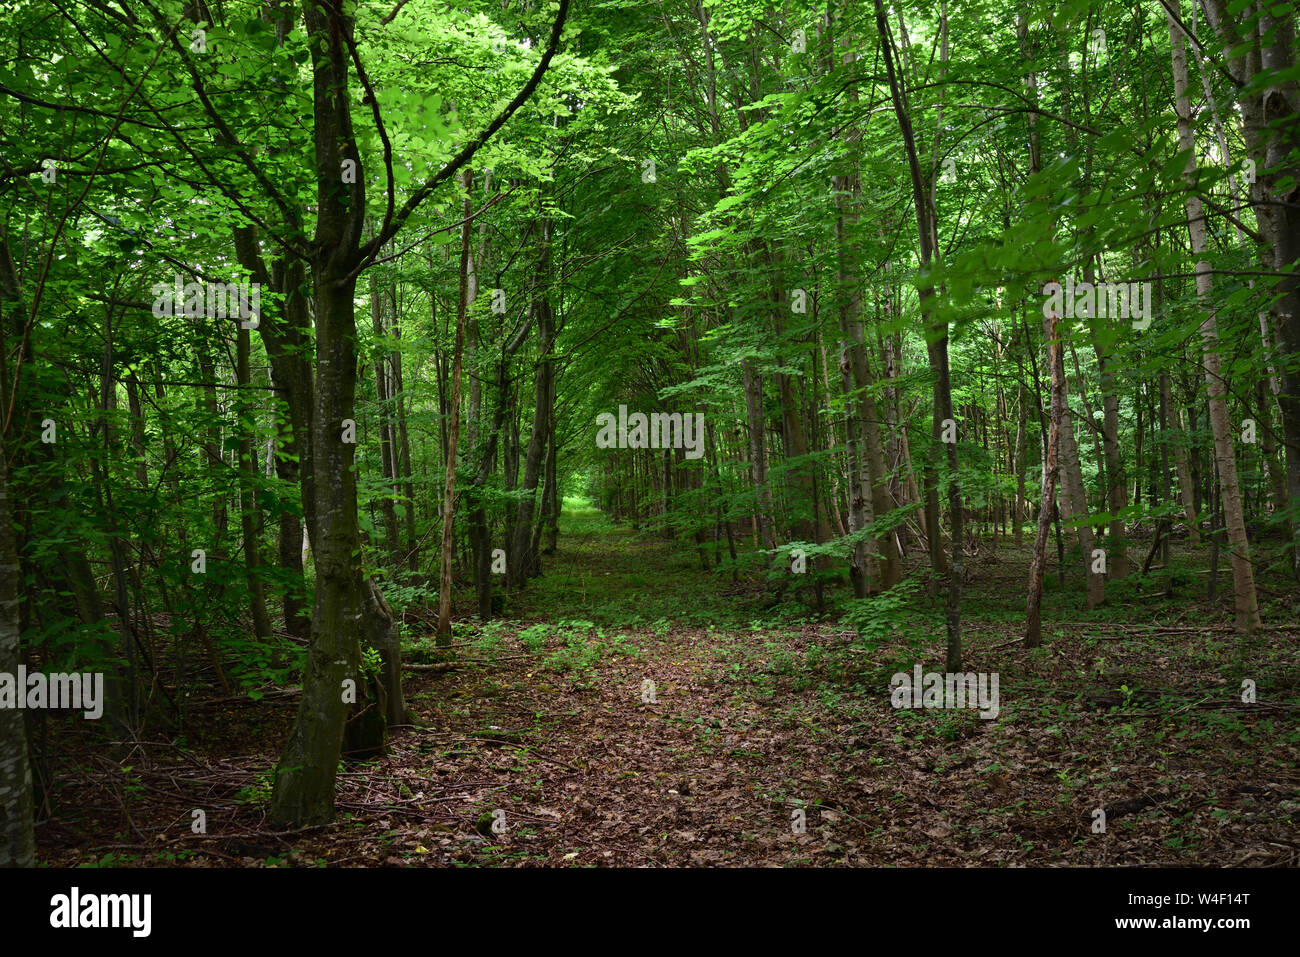 A hidden path leads through the forest with trees on both sides Stock Photo